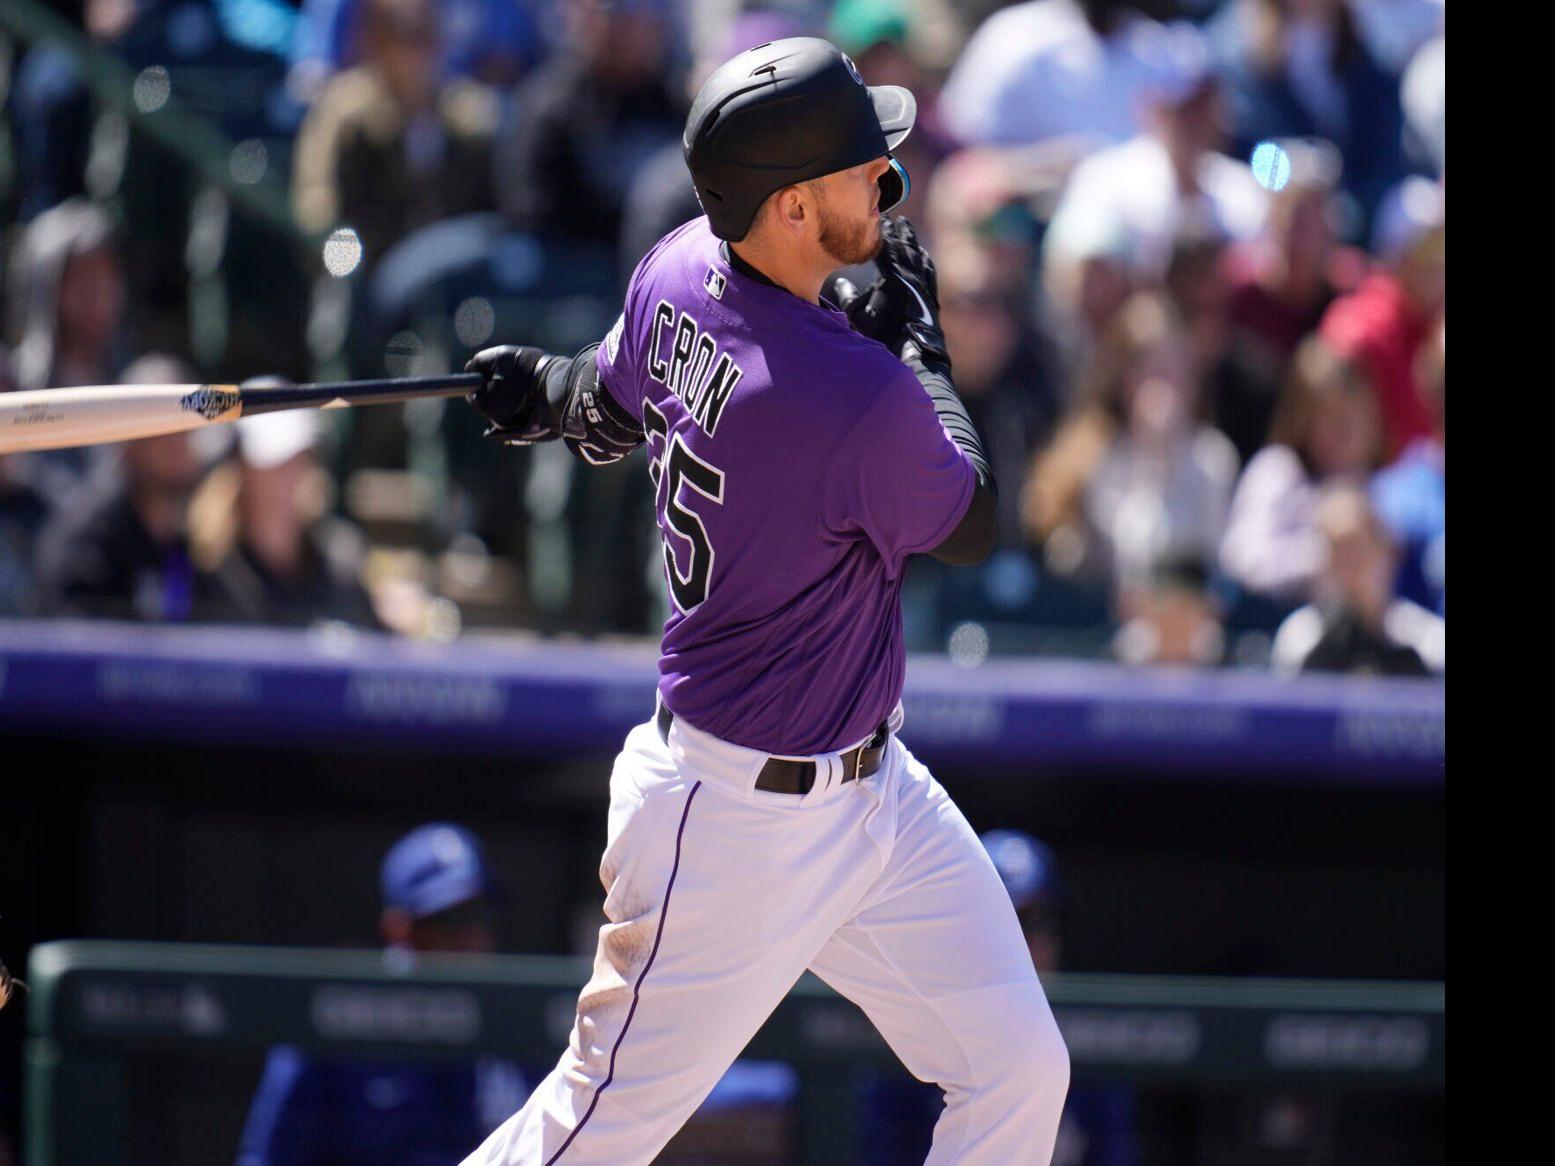 Rockies Mailbag: Grading trade for C.J. Cron and Randal Grichuk